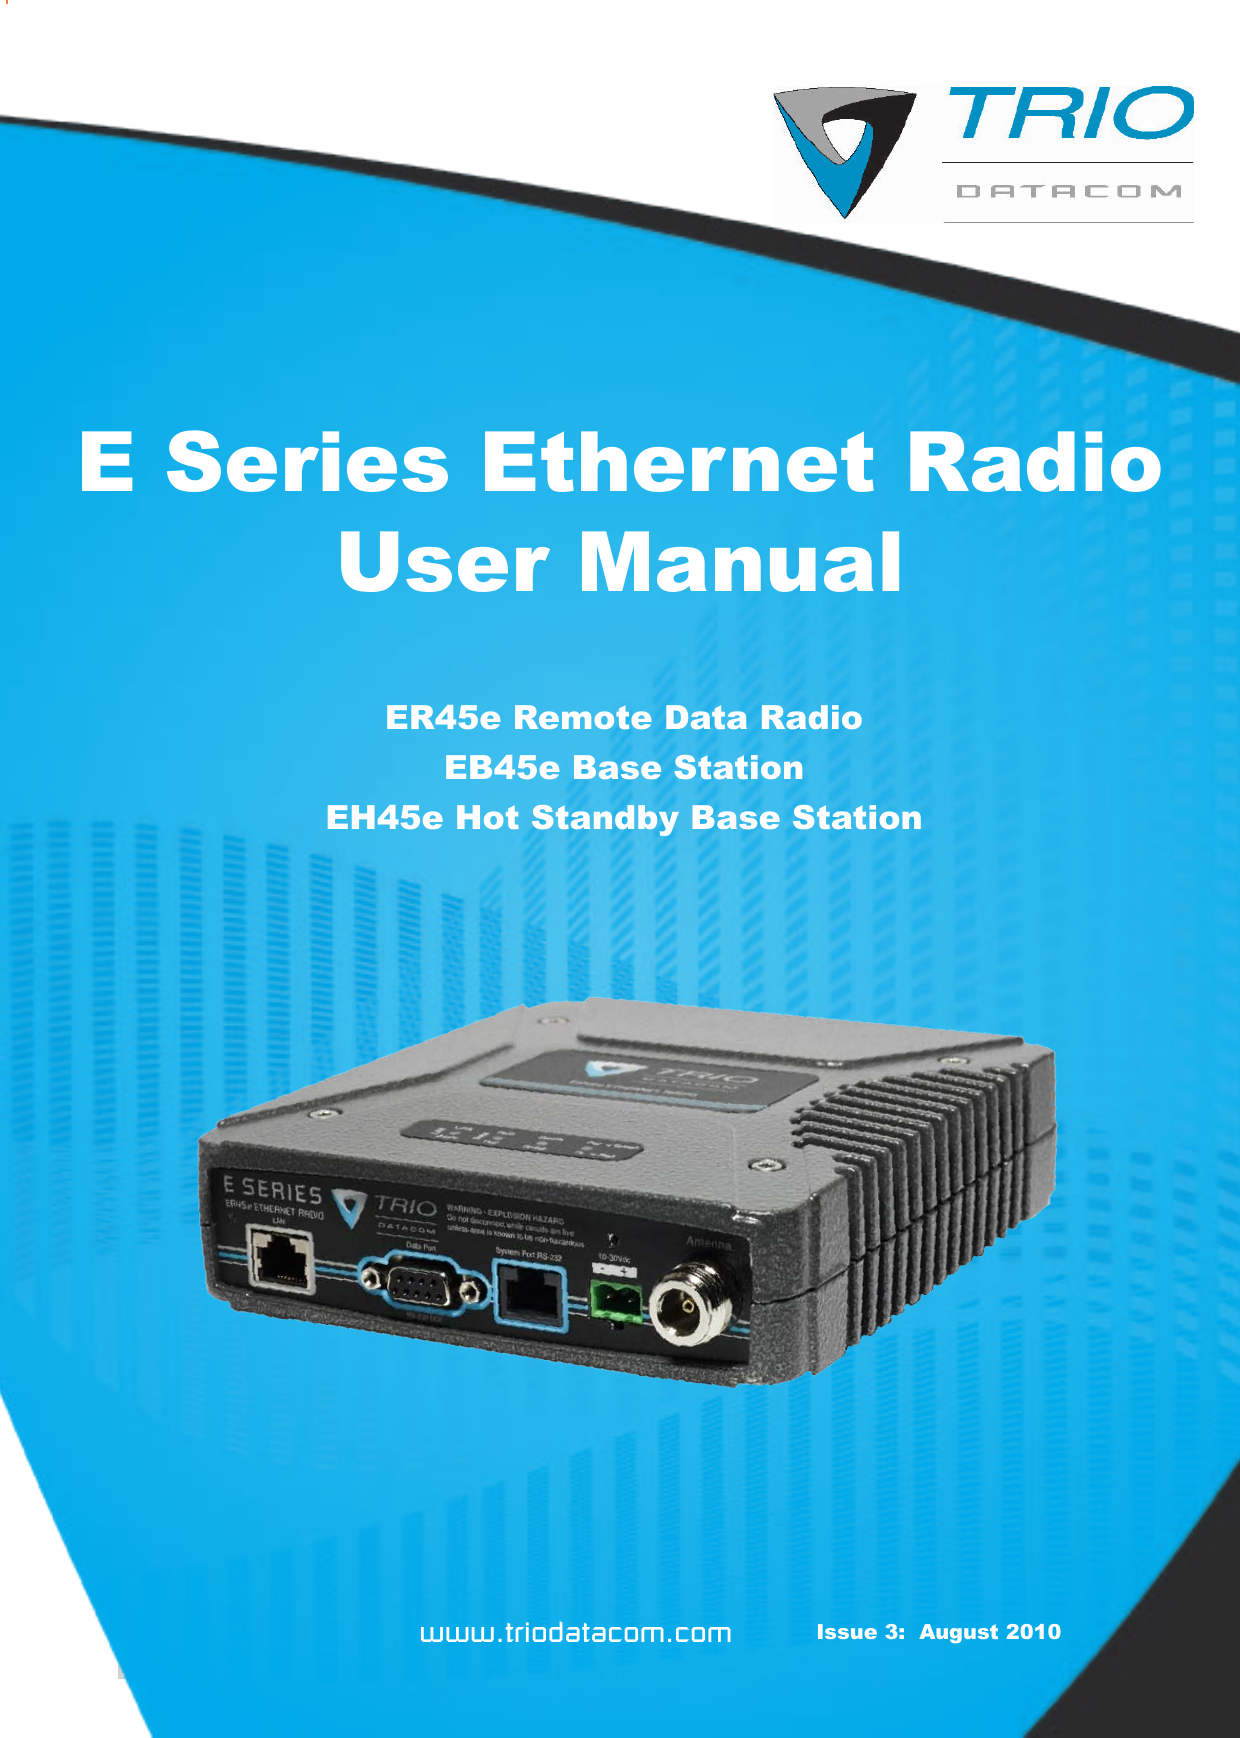 Page  1  E Series Ethernet Radio – User ManualVersion 08-10www.triodatacom.com Issue 3:  August 2010E Series Ethernet Radio User ManualER45e Remote Data Radio EB45e Base StationEH45e Hot Standby Base Station